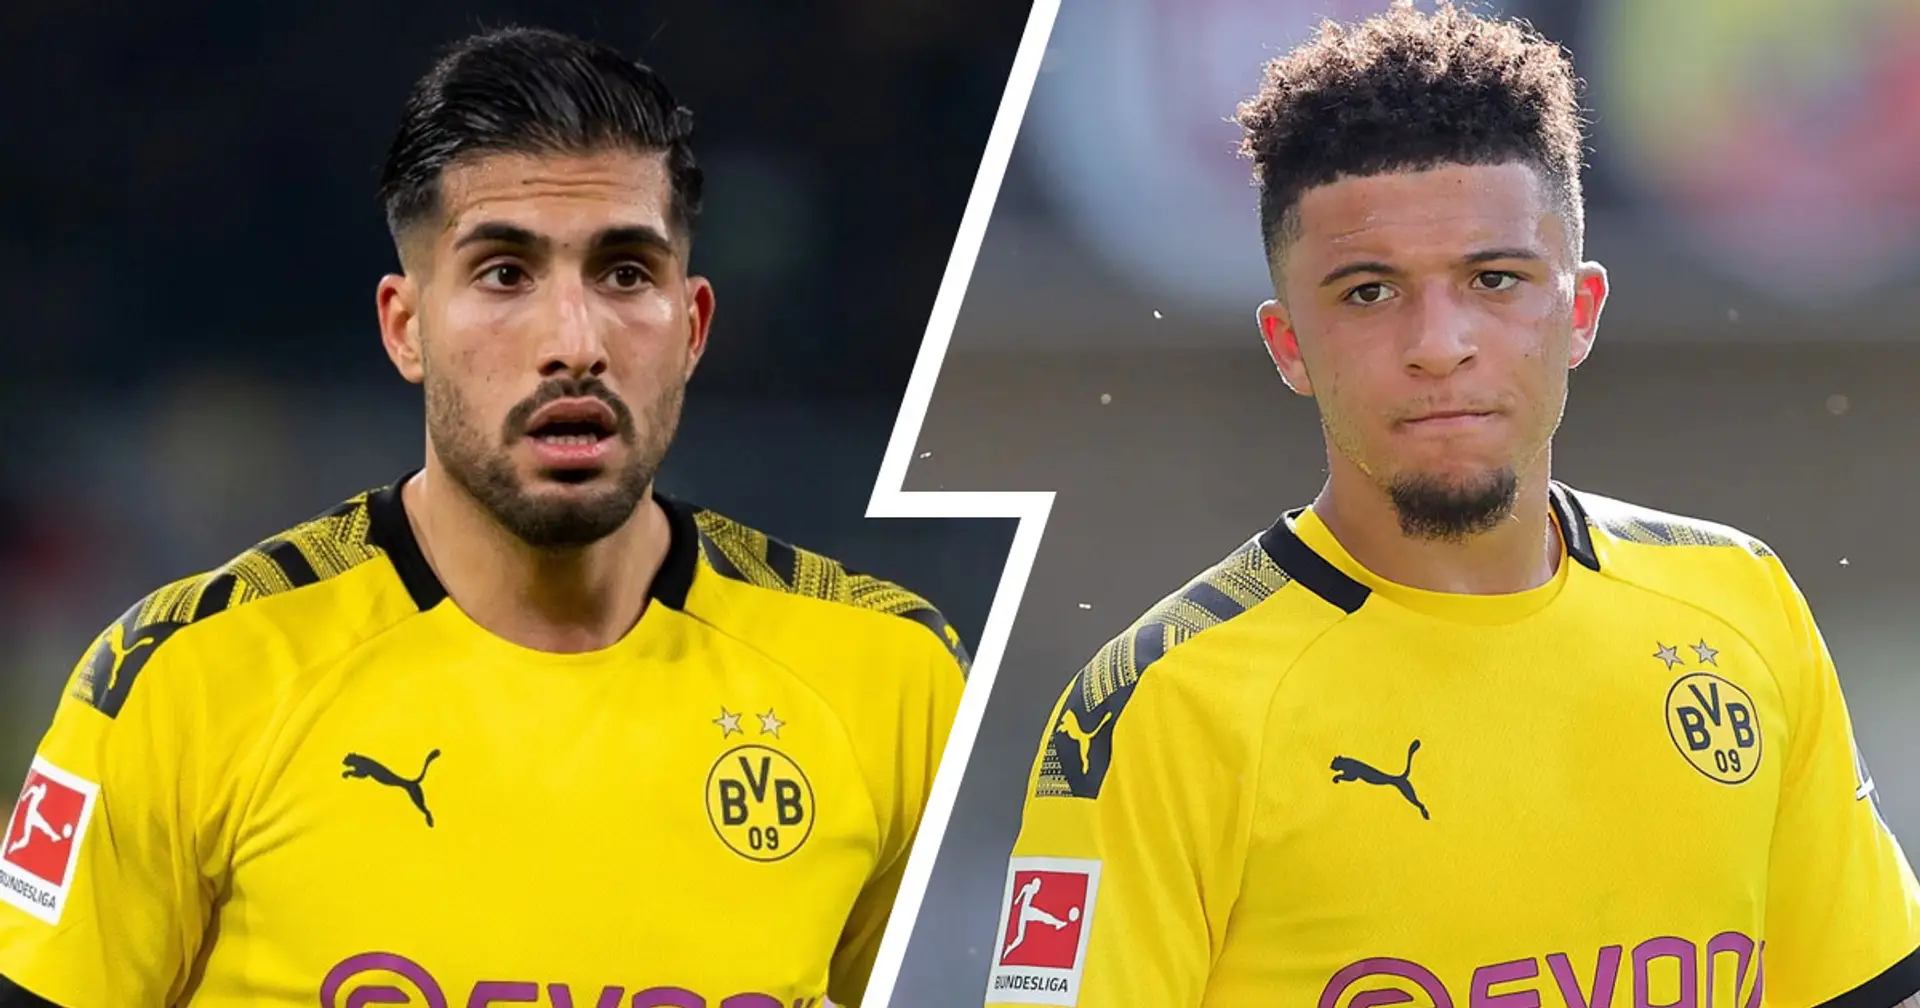 ‘He needs to grow up’: Emre Can tells Sancho ‘to be smarter’ after being fined for violating lockdown restrictions